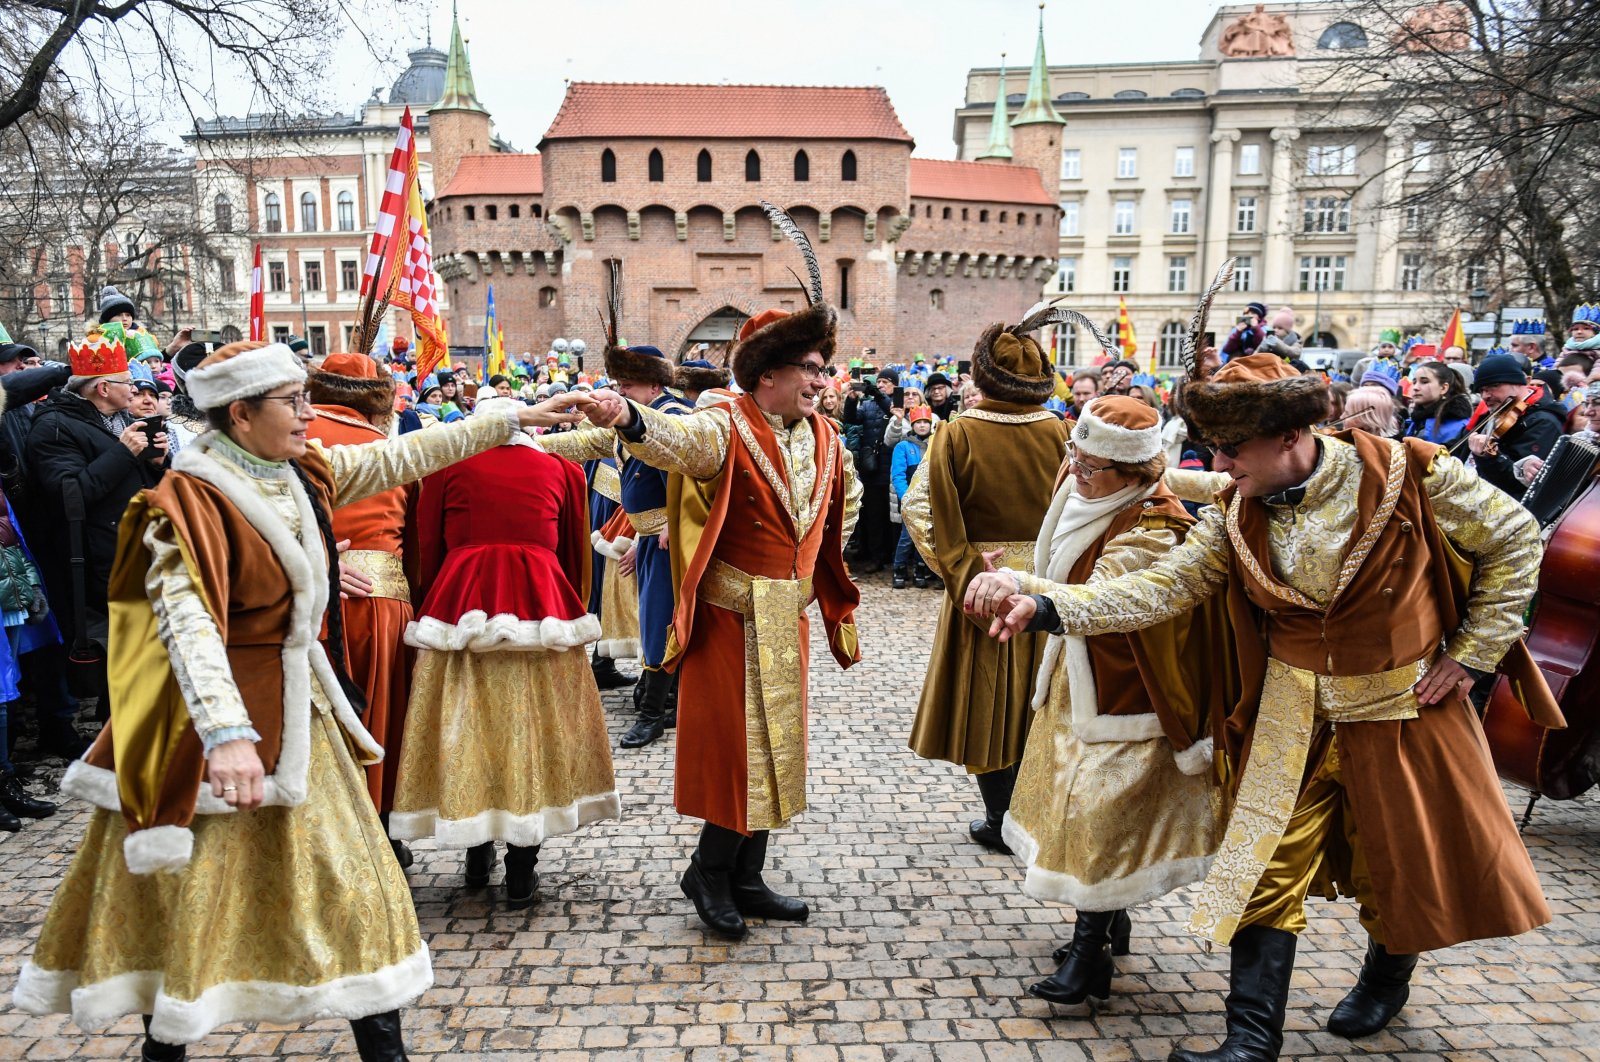 Participants of a procession dance the polonaise in front of the Florianska gate, Krakow, Poland, Jan. 6, 2023. (Getty Images Photo)